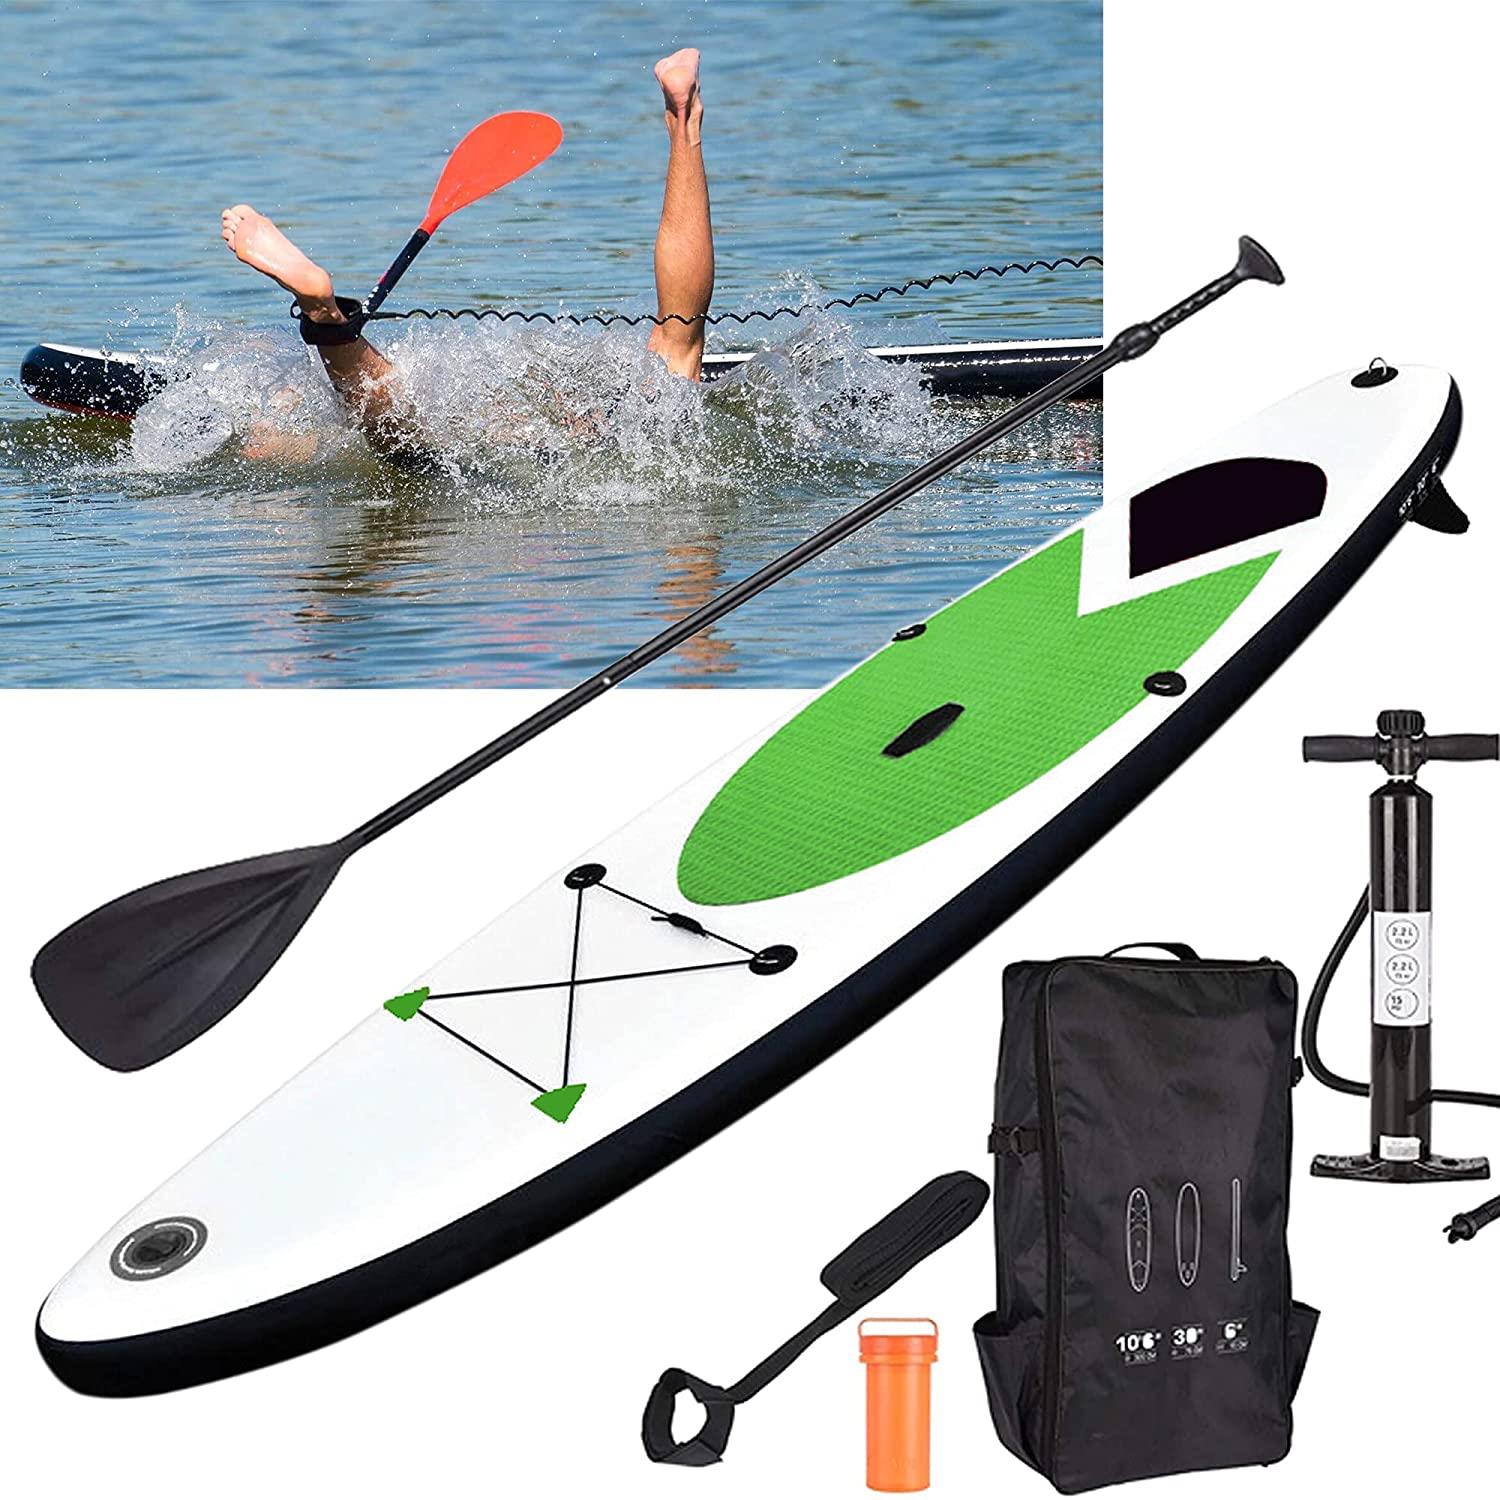 Green Inflatable 305cm SUP Stand Up Paddle Board Surf Board by Geezy - The Magic Toy Shop